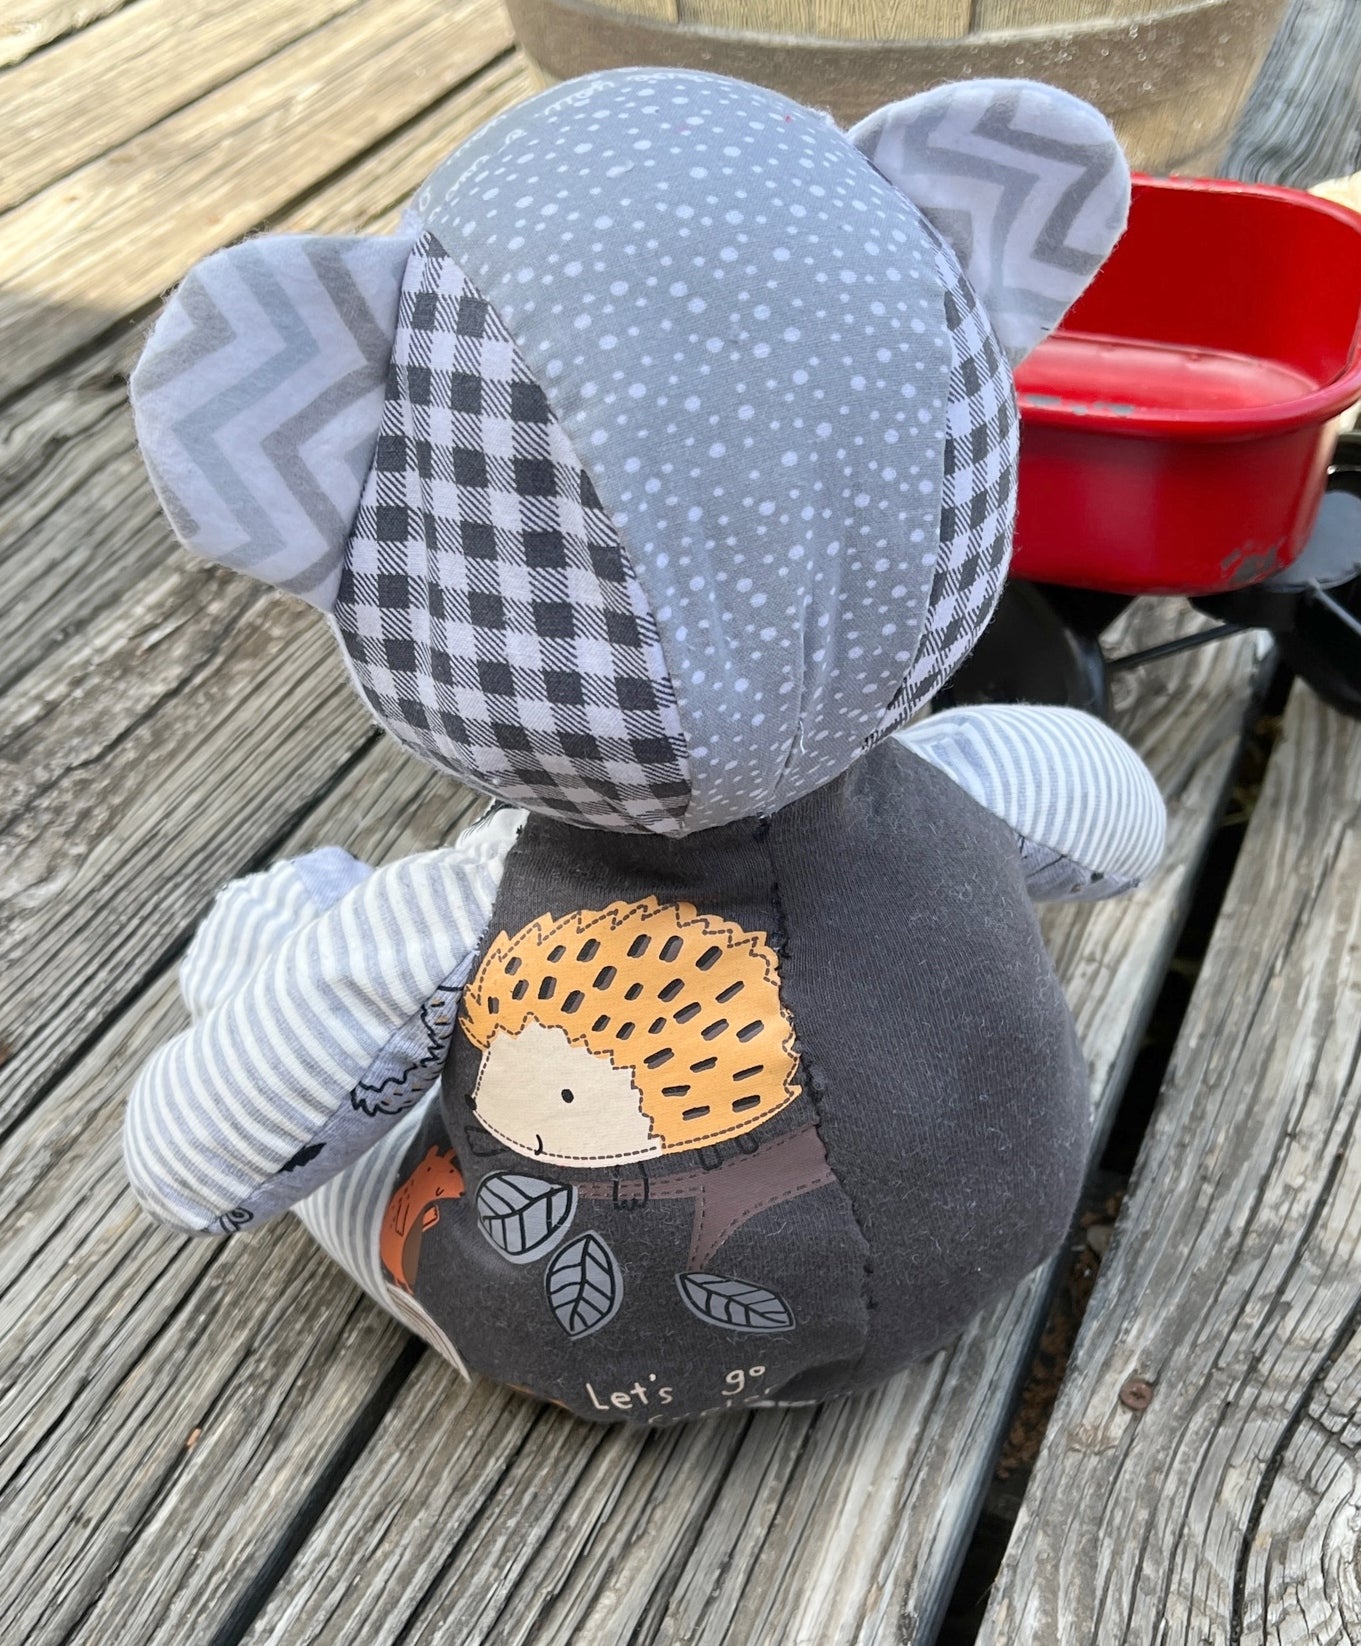 custom memory bear, back of the bear (shown boy, made from baby clothes)